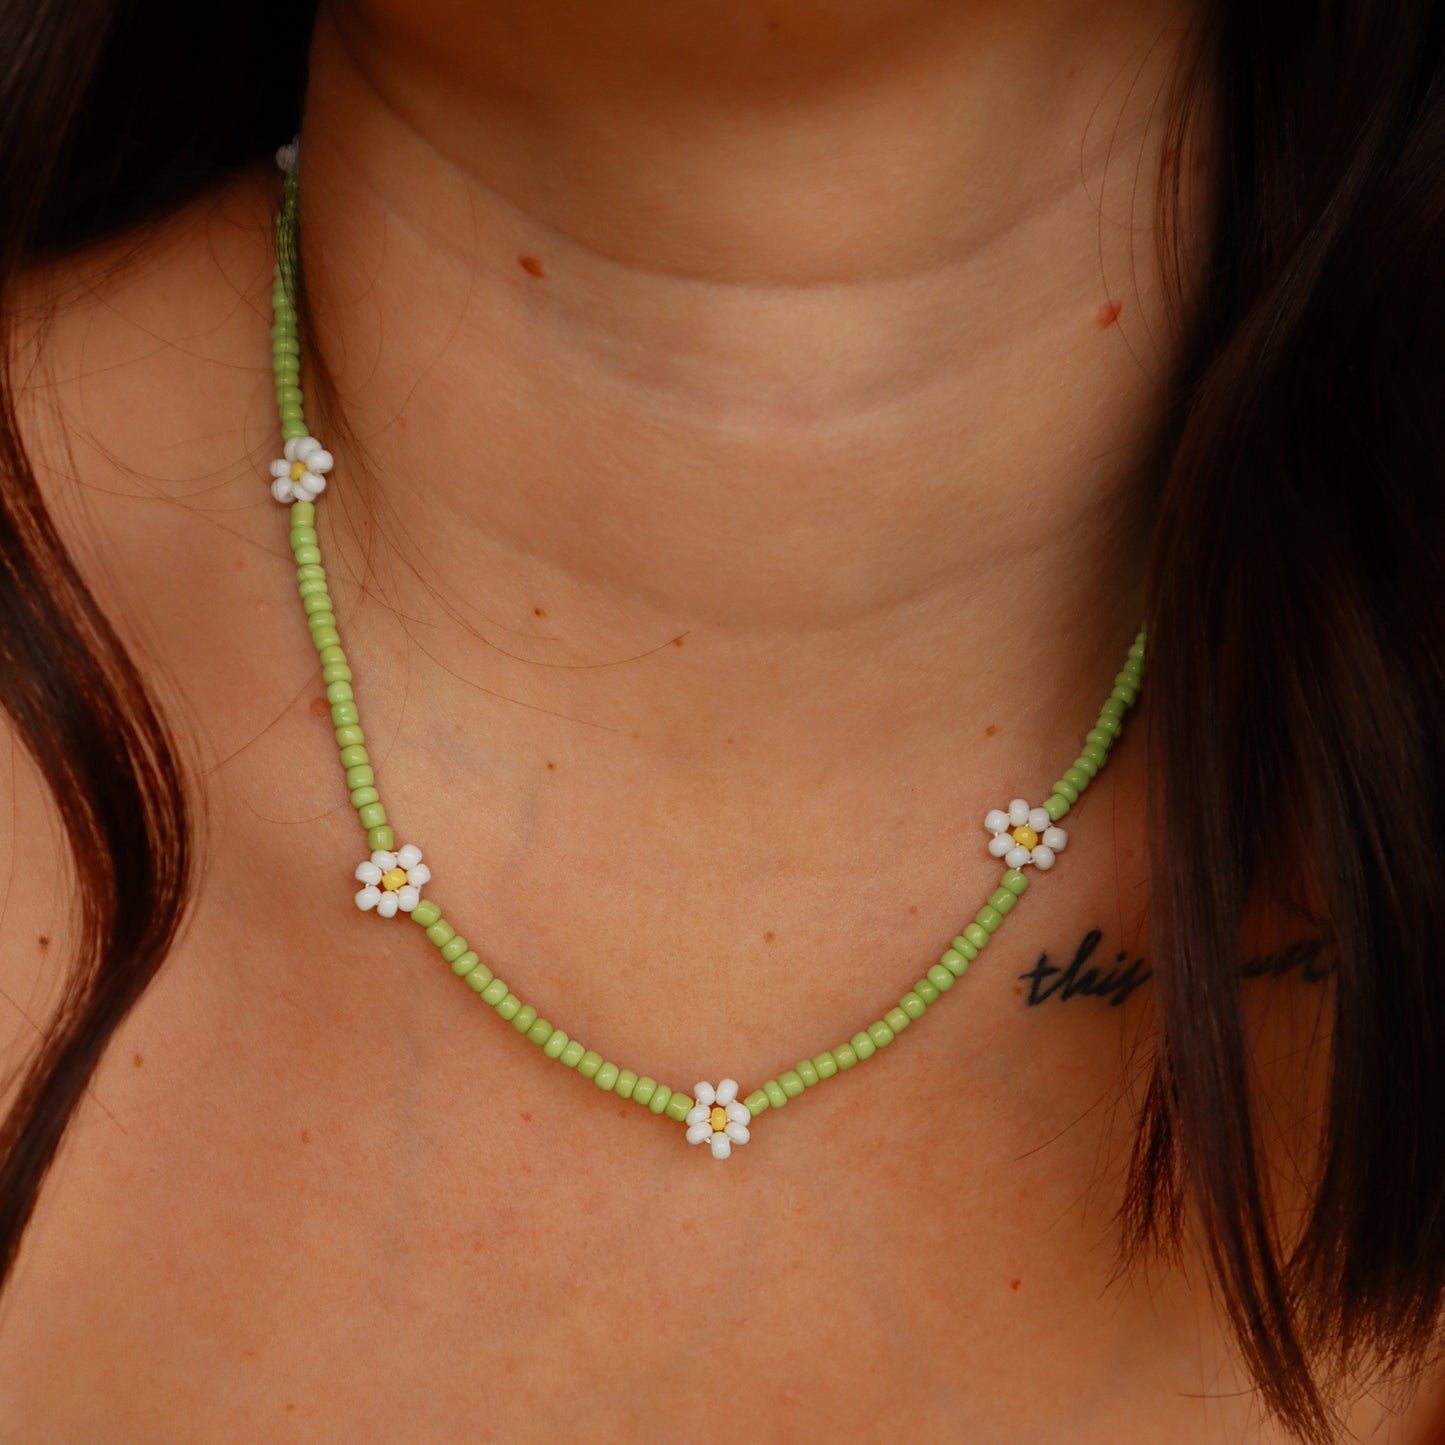 The Pixie Daisy Necklace